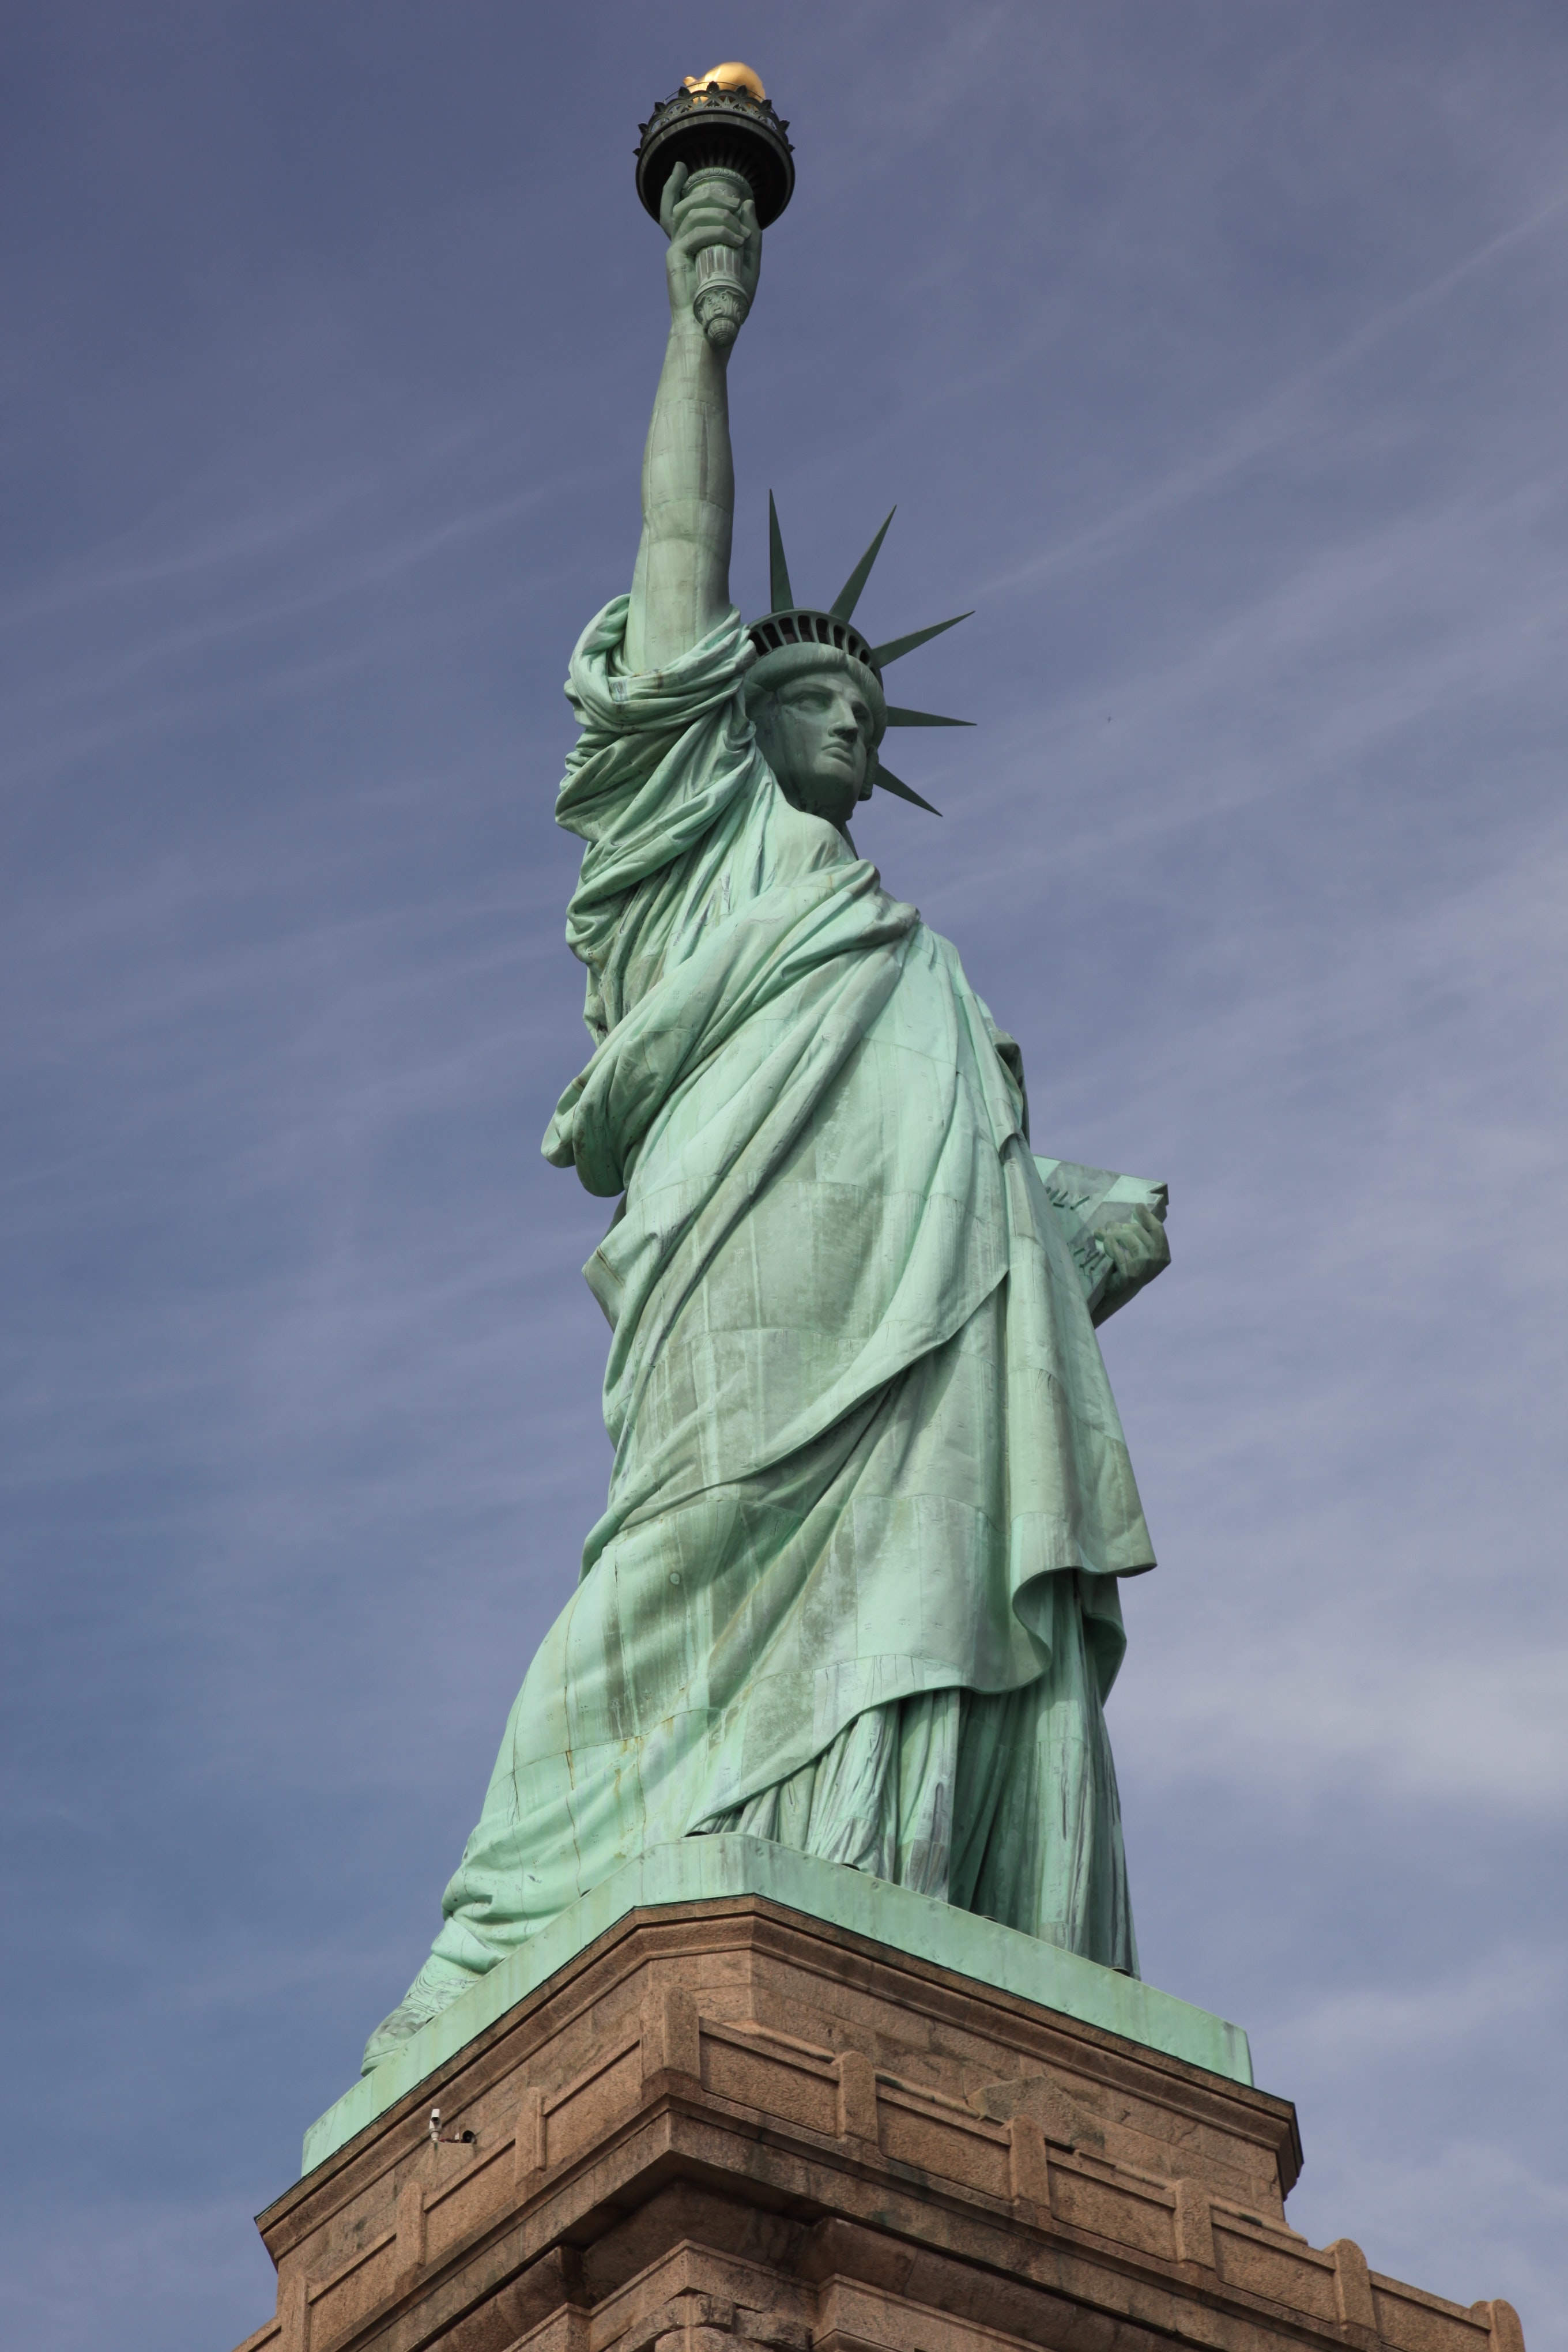 The statue of liberty photo